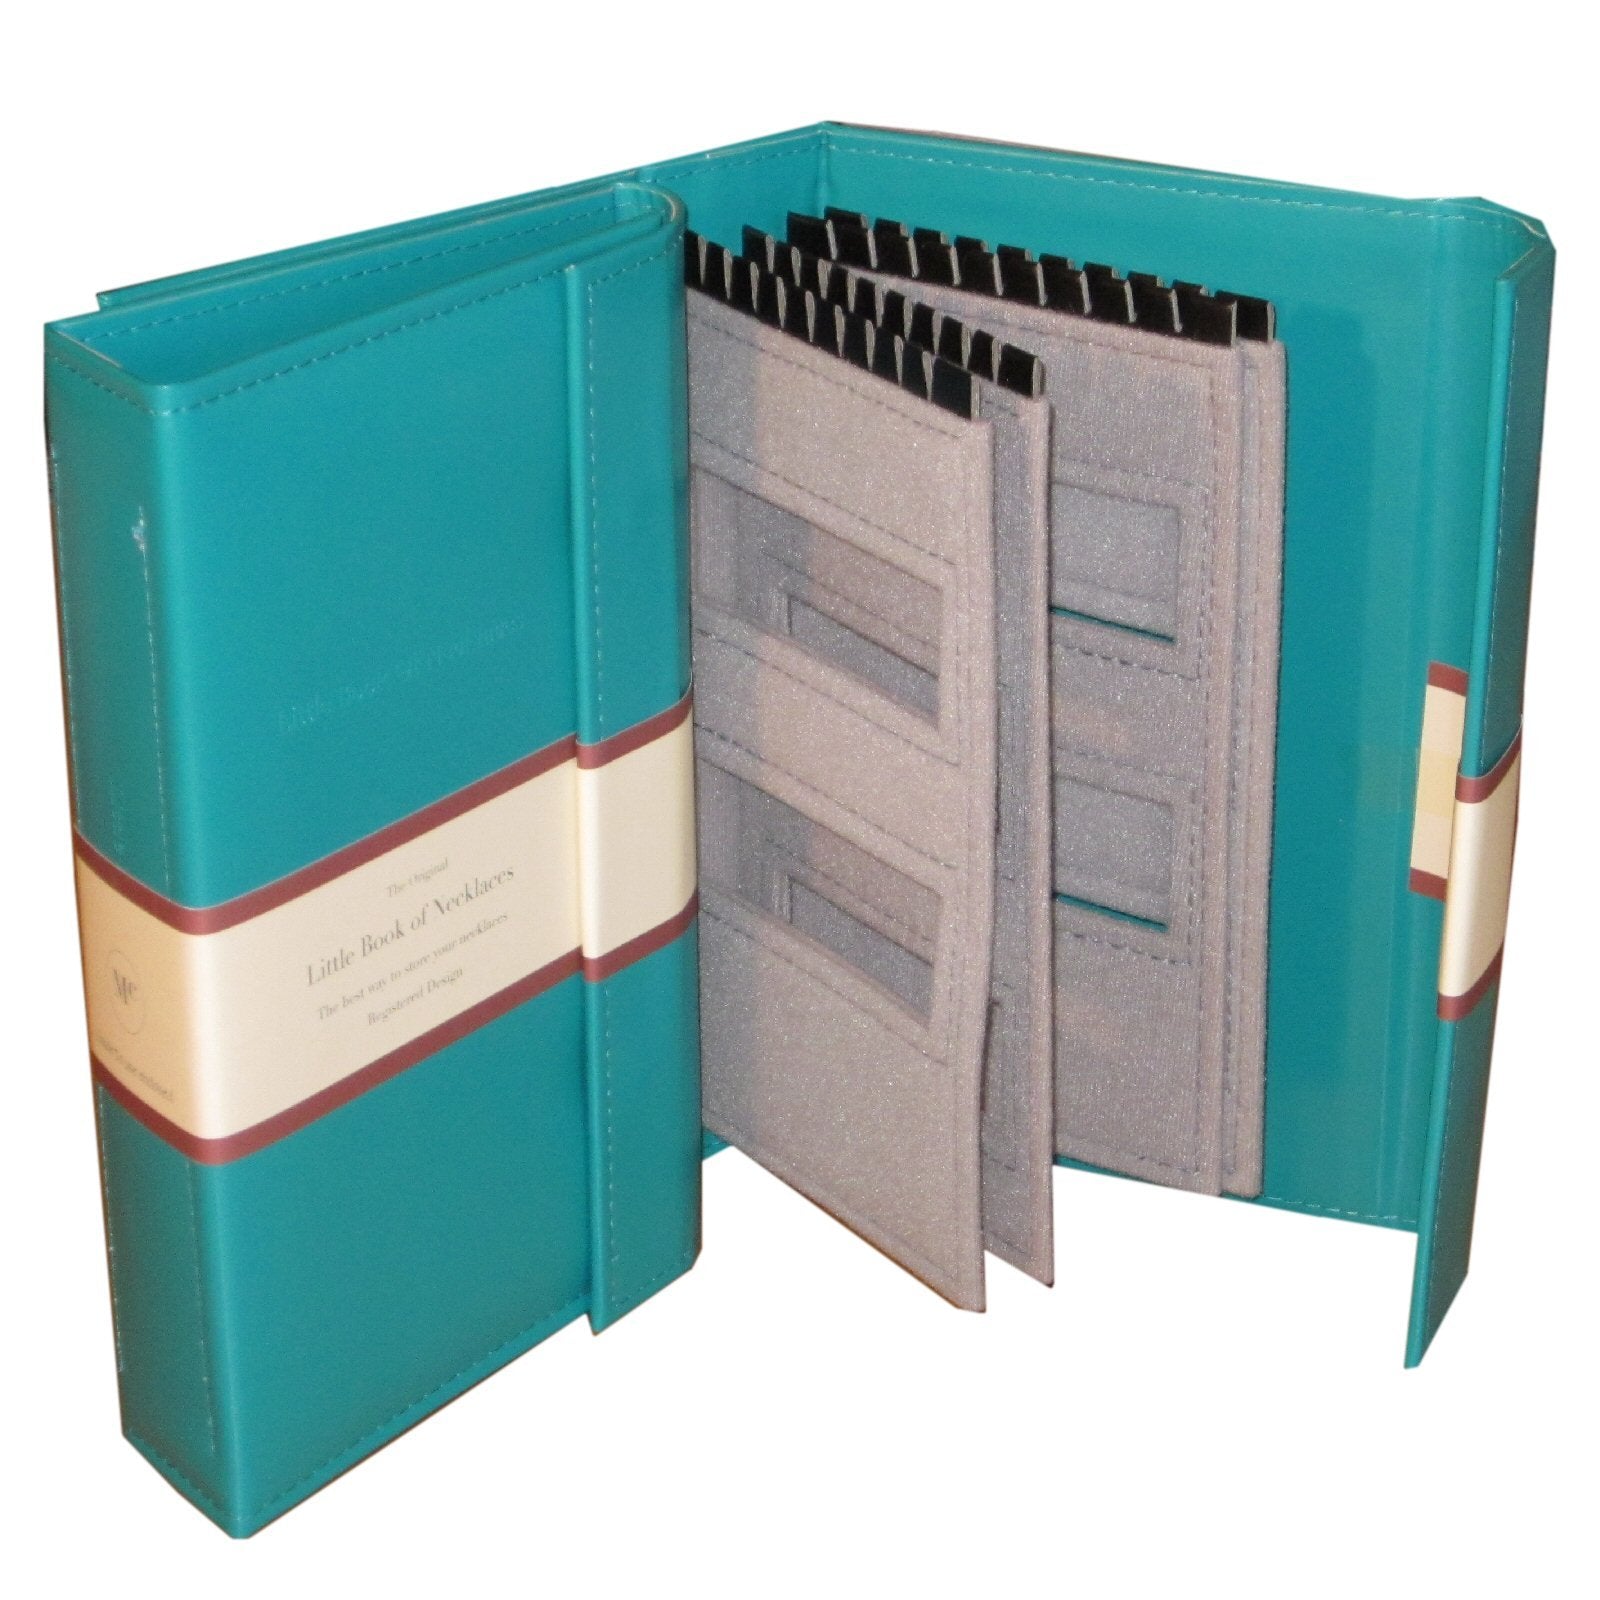 The Little Book of Necklaces - Teal necklace book holds 20 necklaces on 4 pages